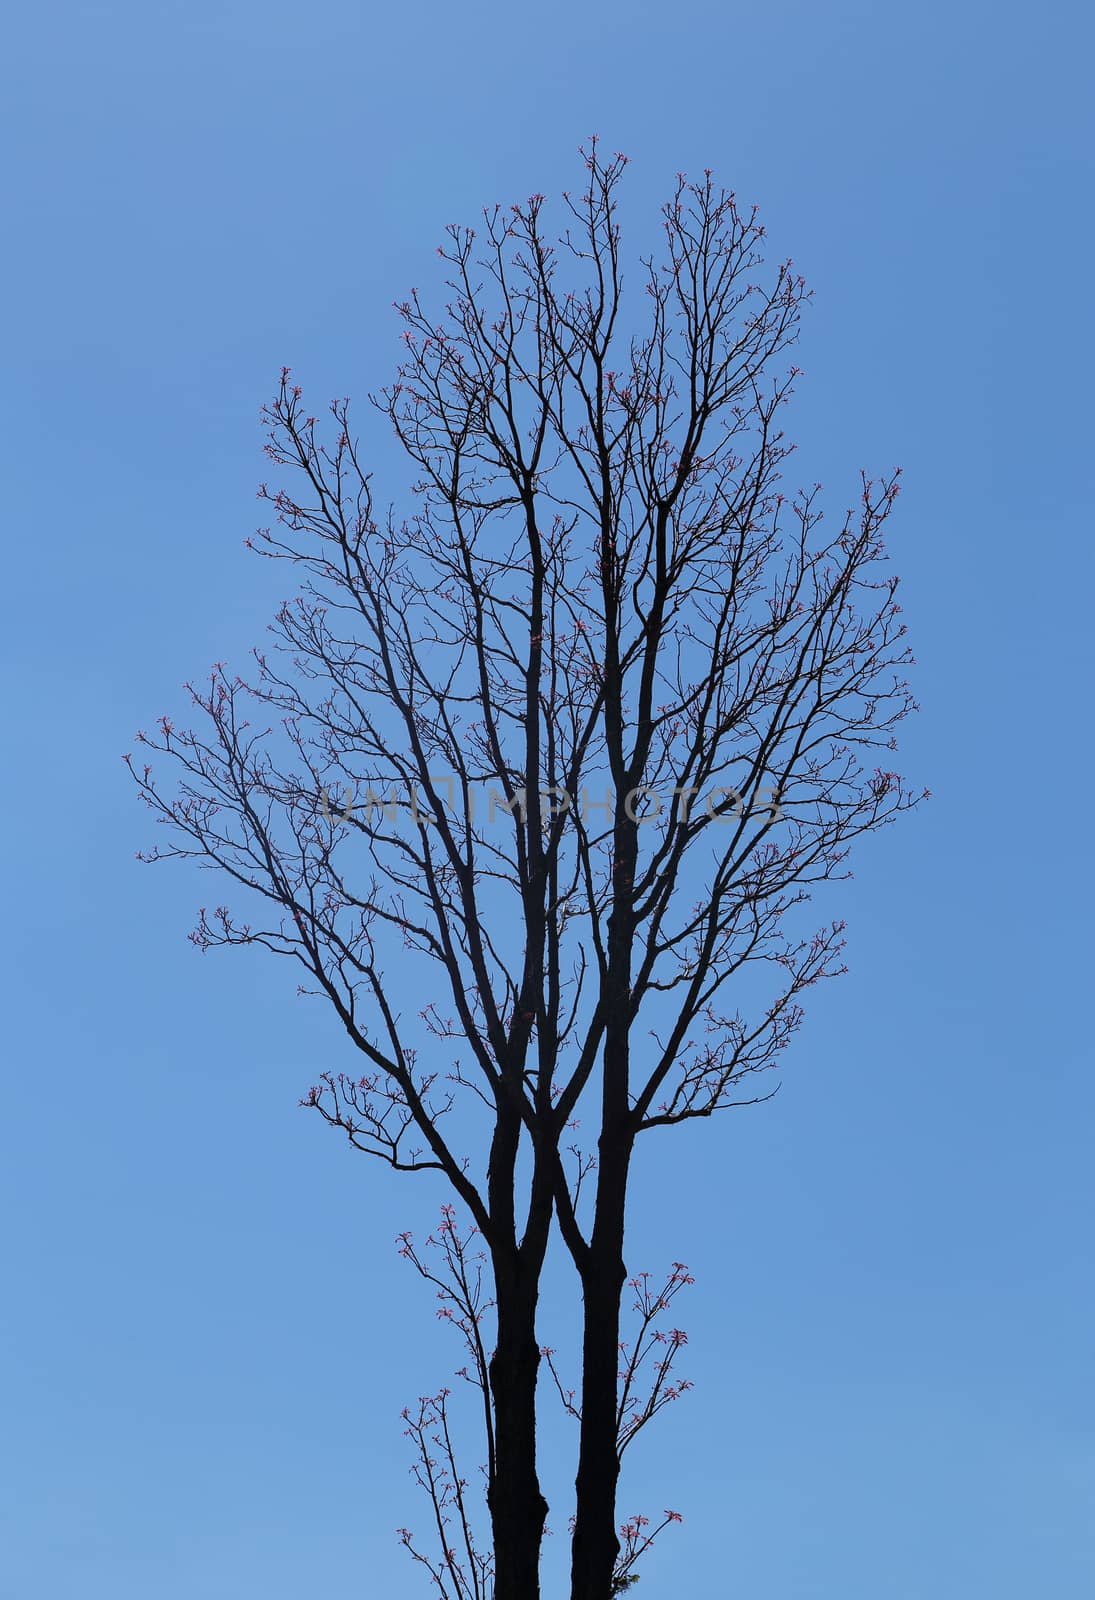 Leafless branches with pink flower and blue sky background